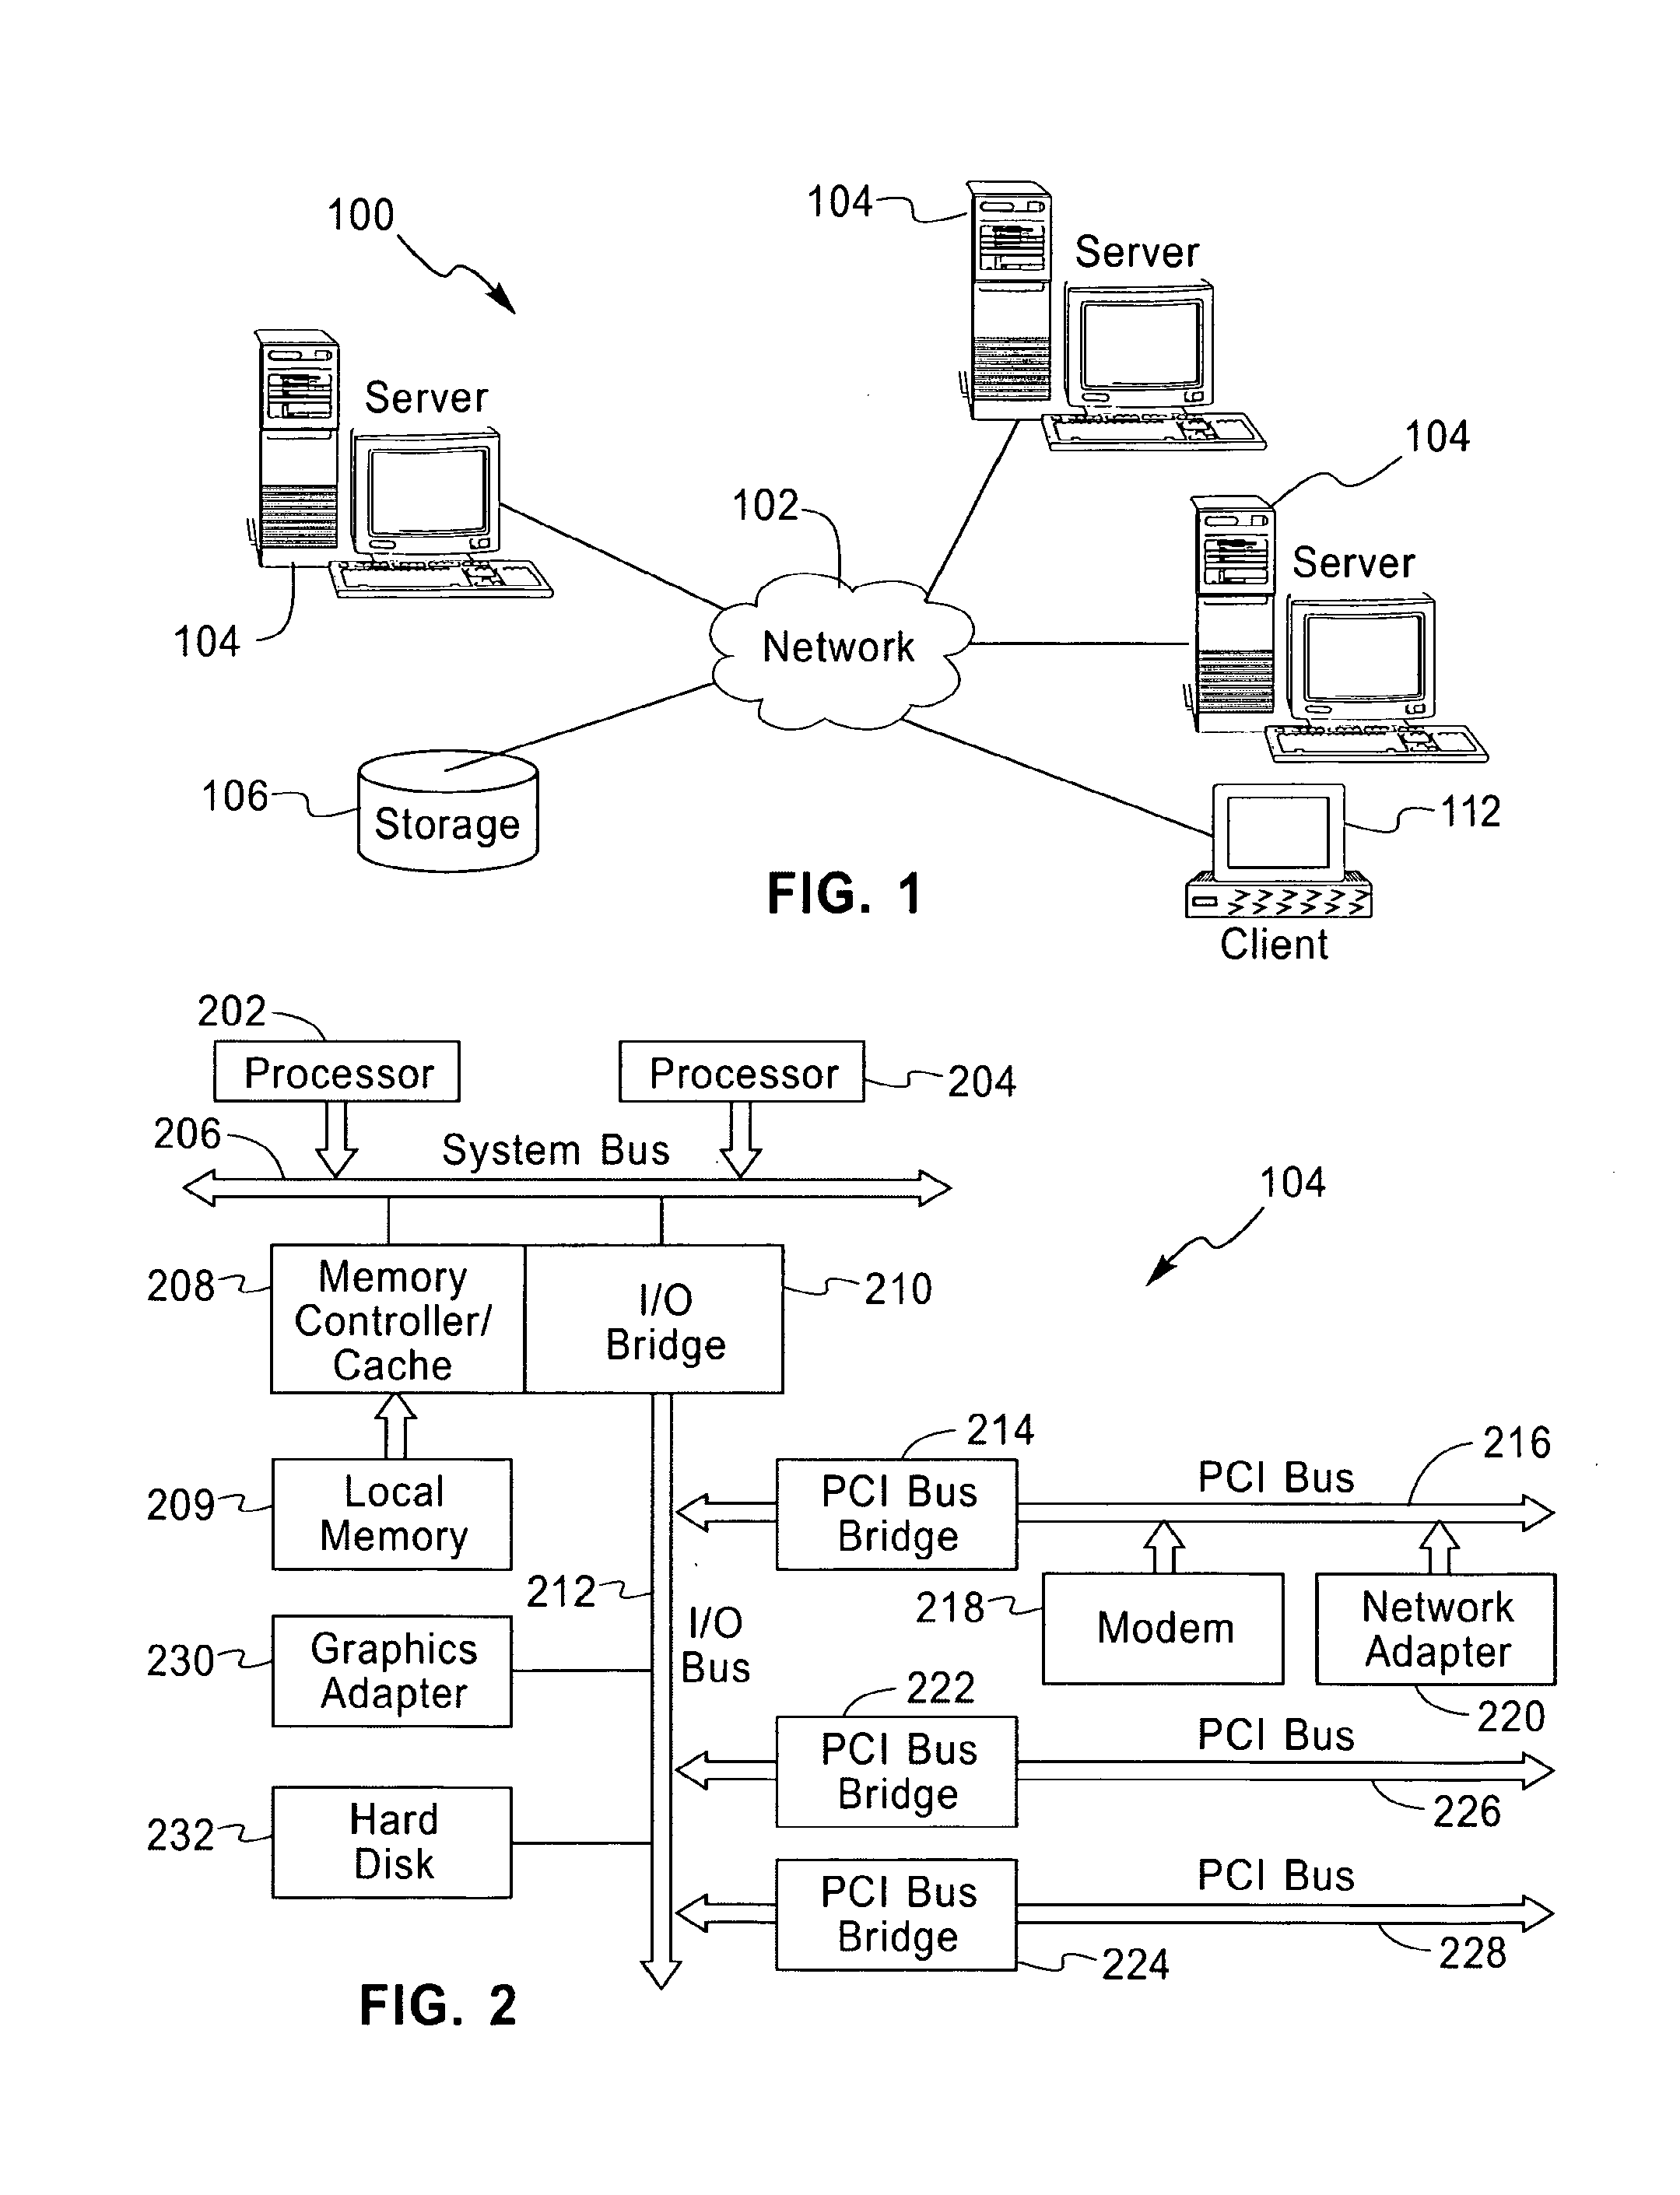 Method for reducing variability and oscillations in load balancing recommendations using historical values and workload metrics